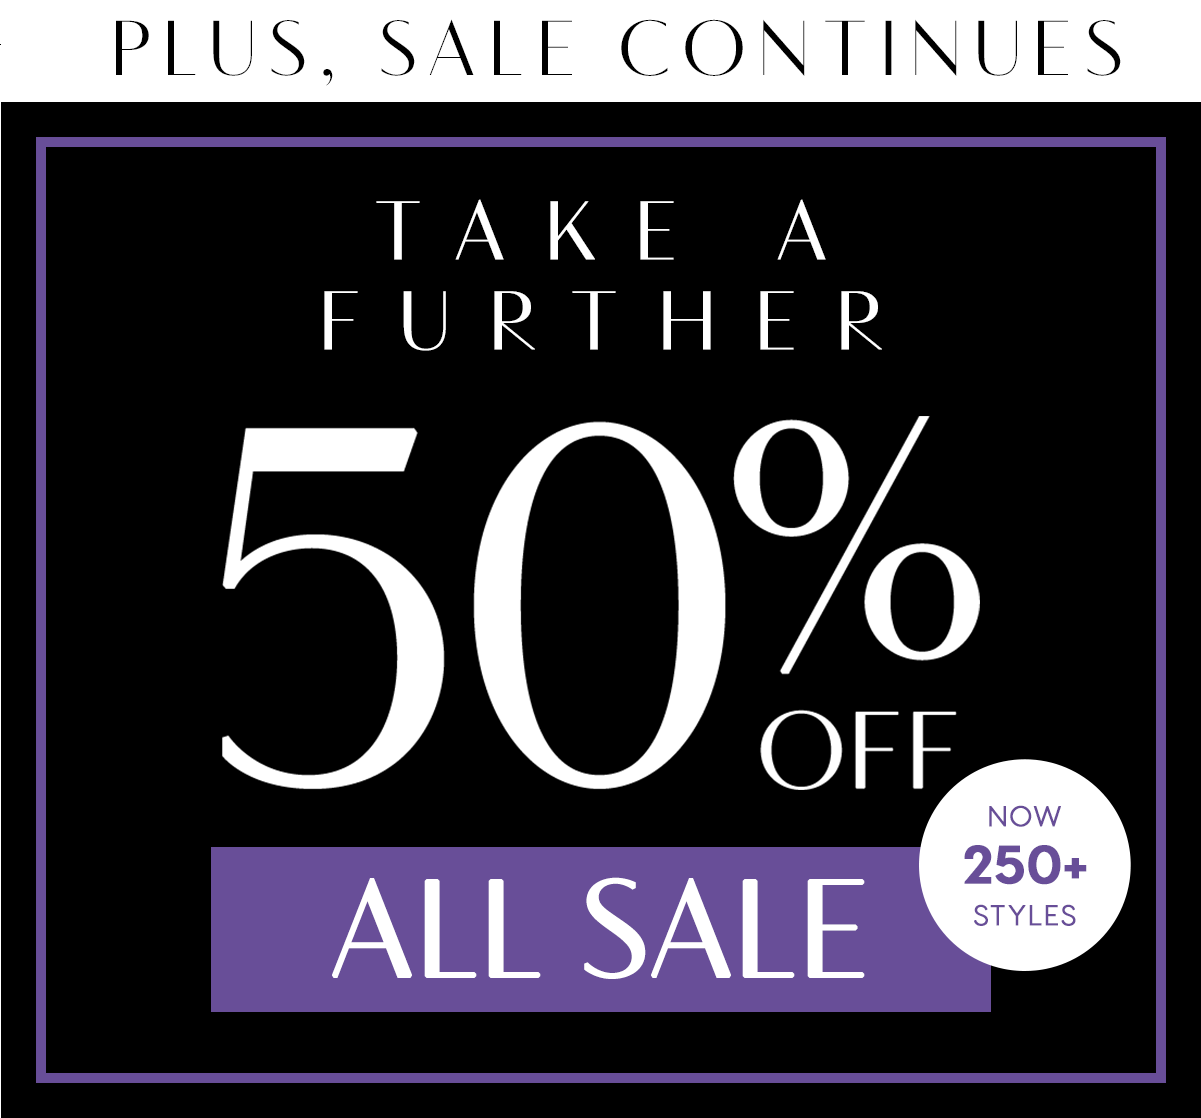 Plus, Sale Continues. Take A Further 50% Off All Sale. 250+ Styles.